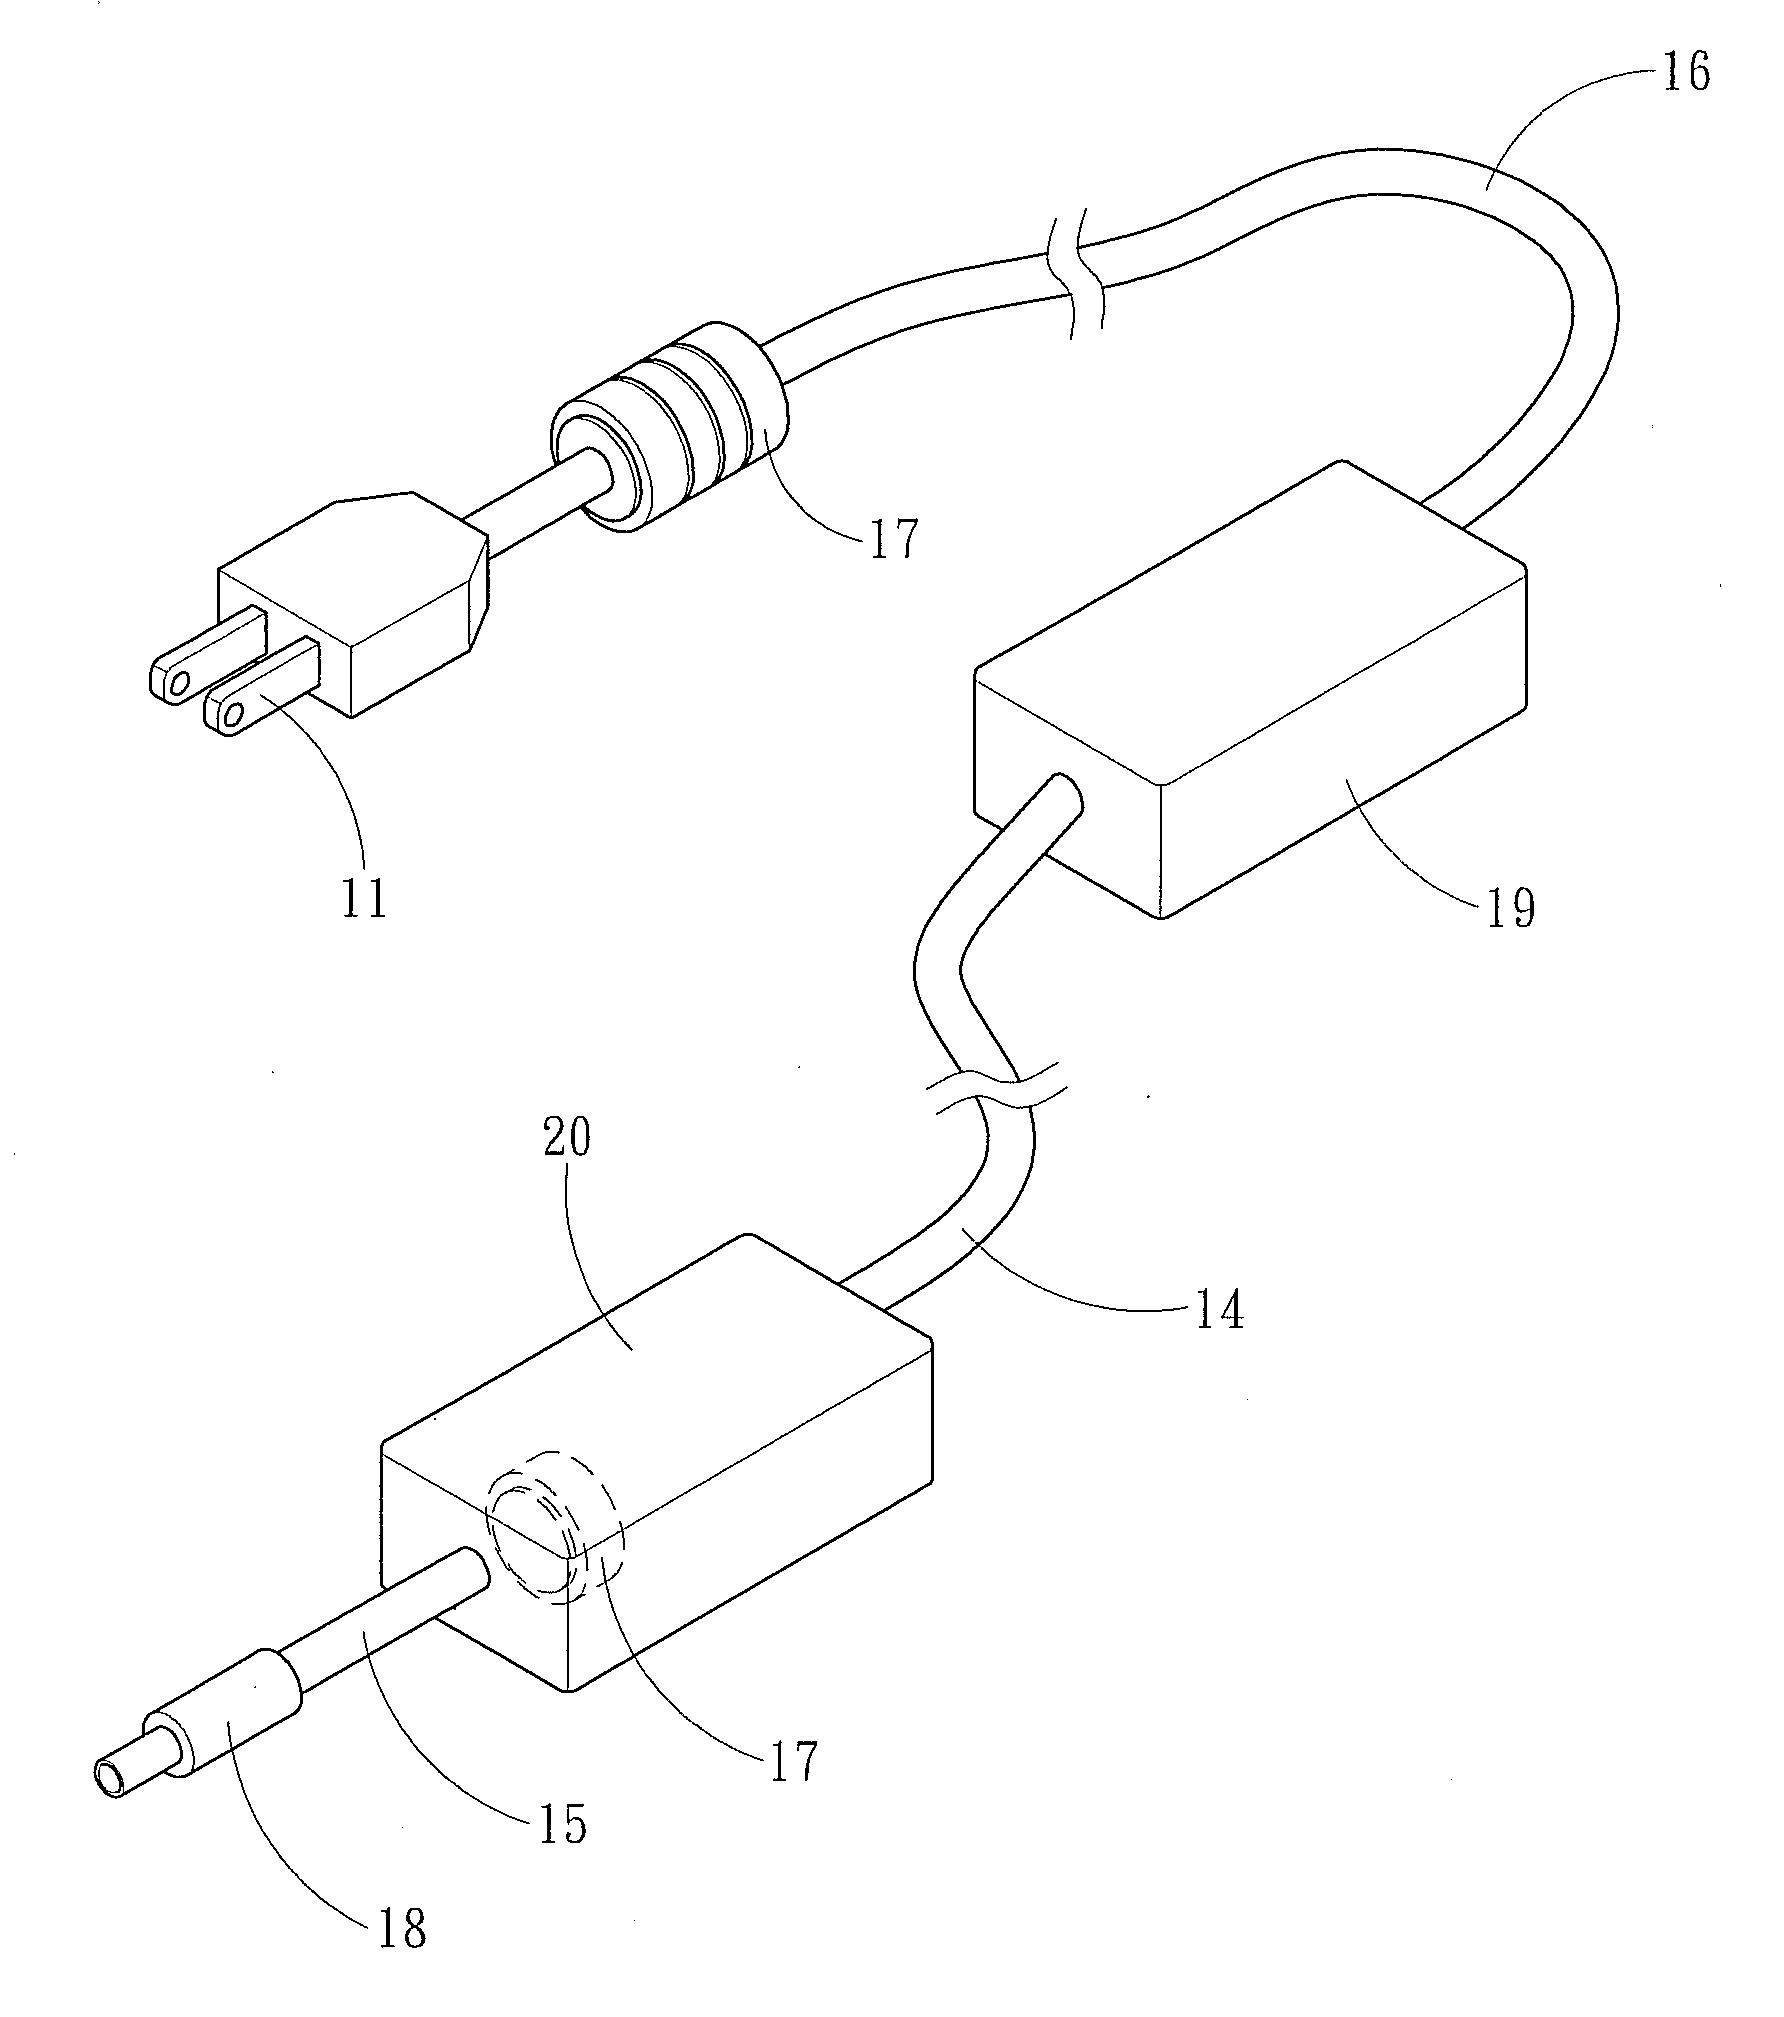 Adapter connection structure